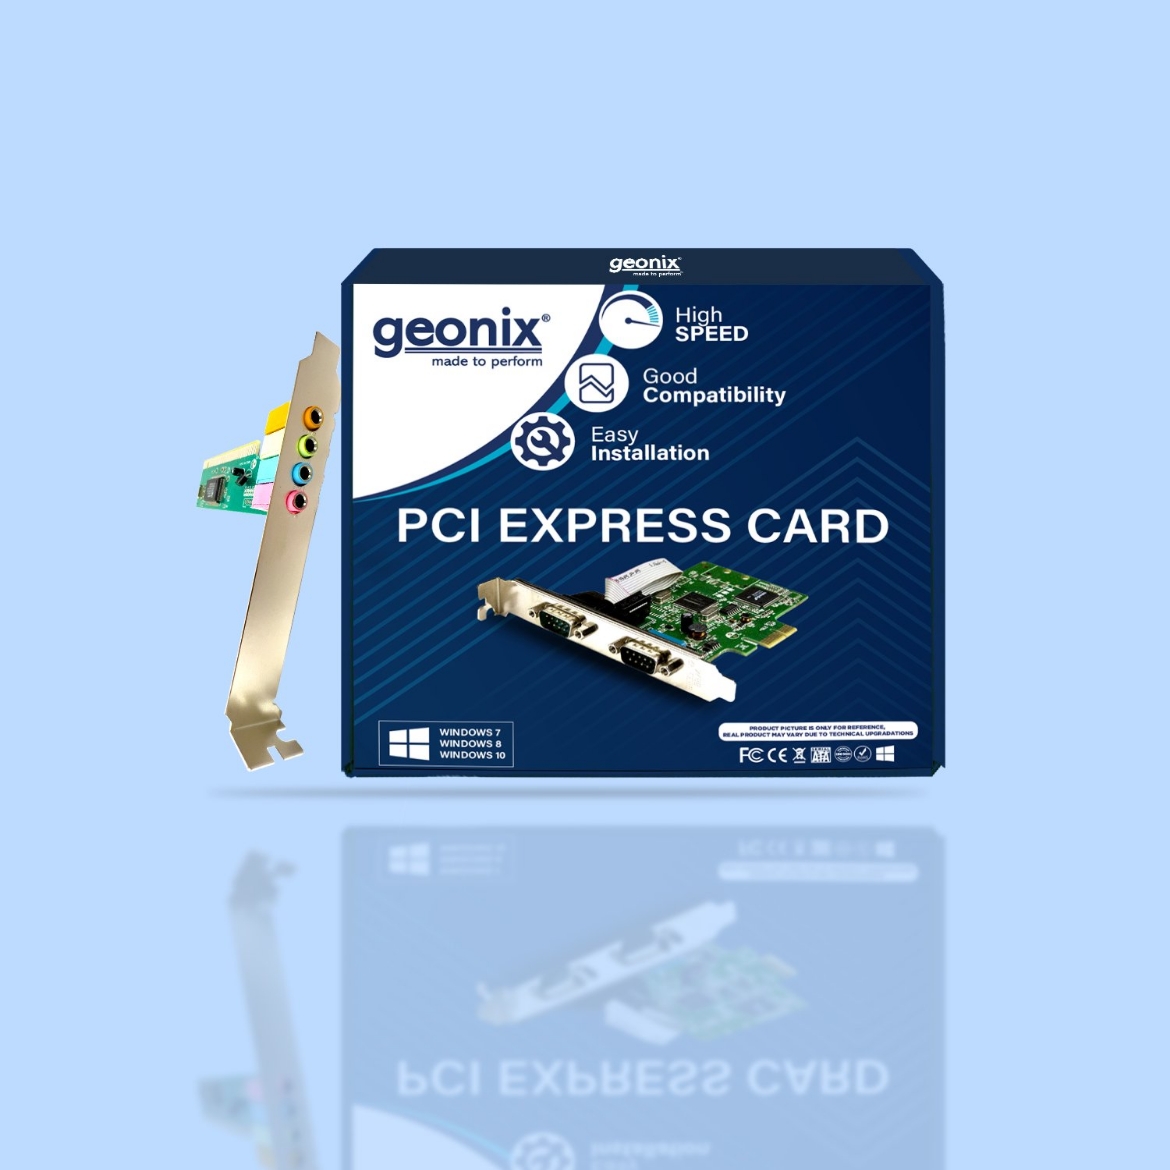 Picture of PCI Sound Card